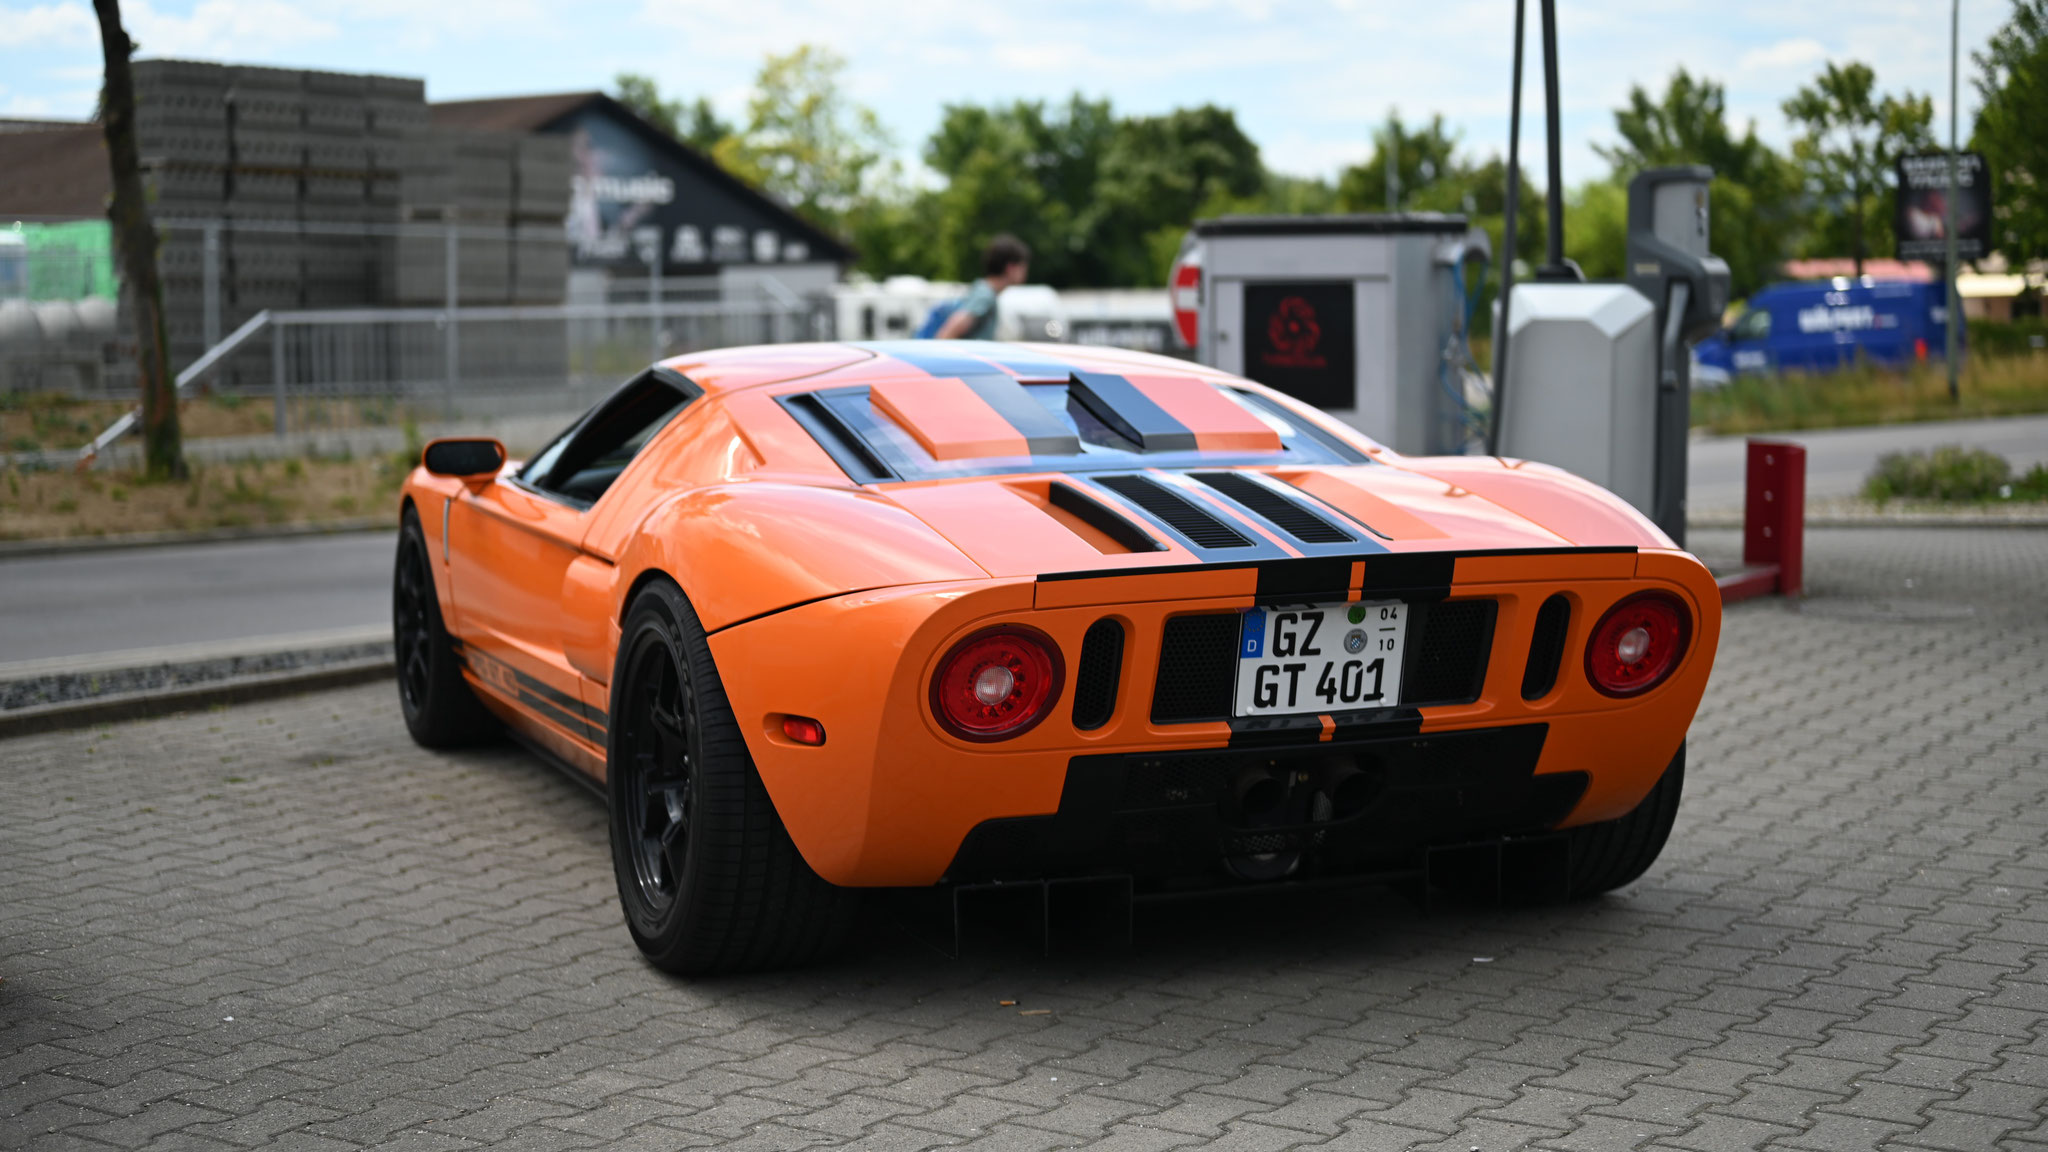 Ford GT - GZ-GT401